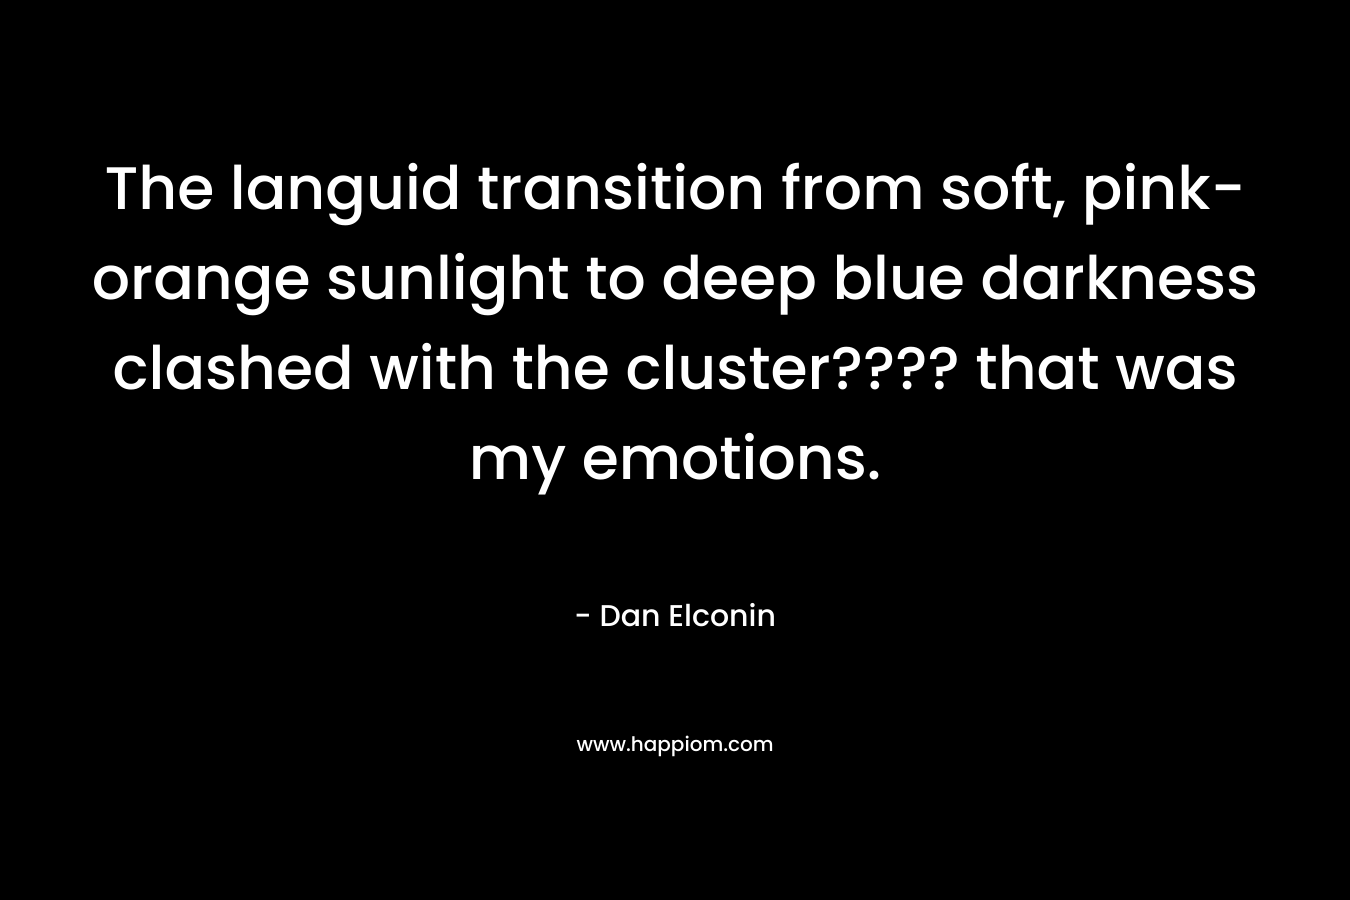 The languid transition from soft, pink-orange sunlight to deep blue darkness clashed with the cluster???? that was my emotions. – Dan Elconin